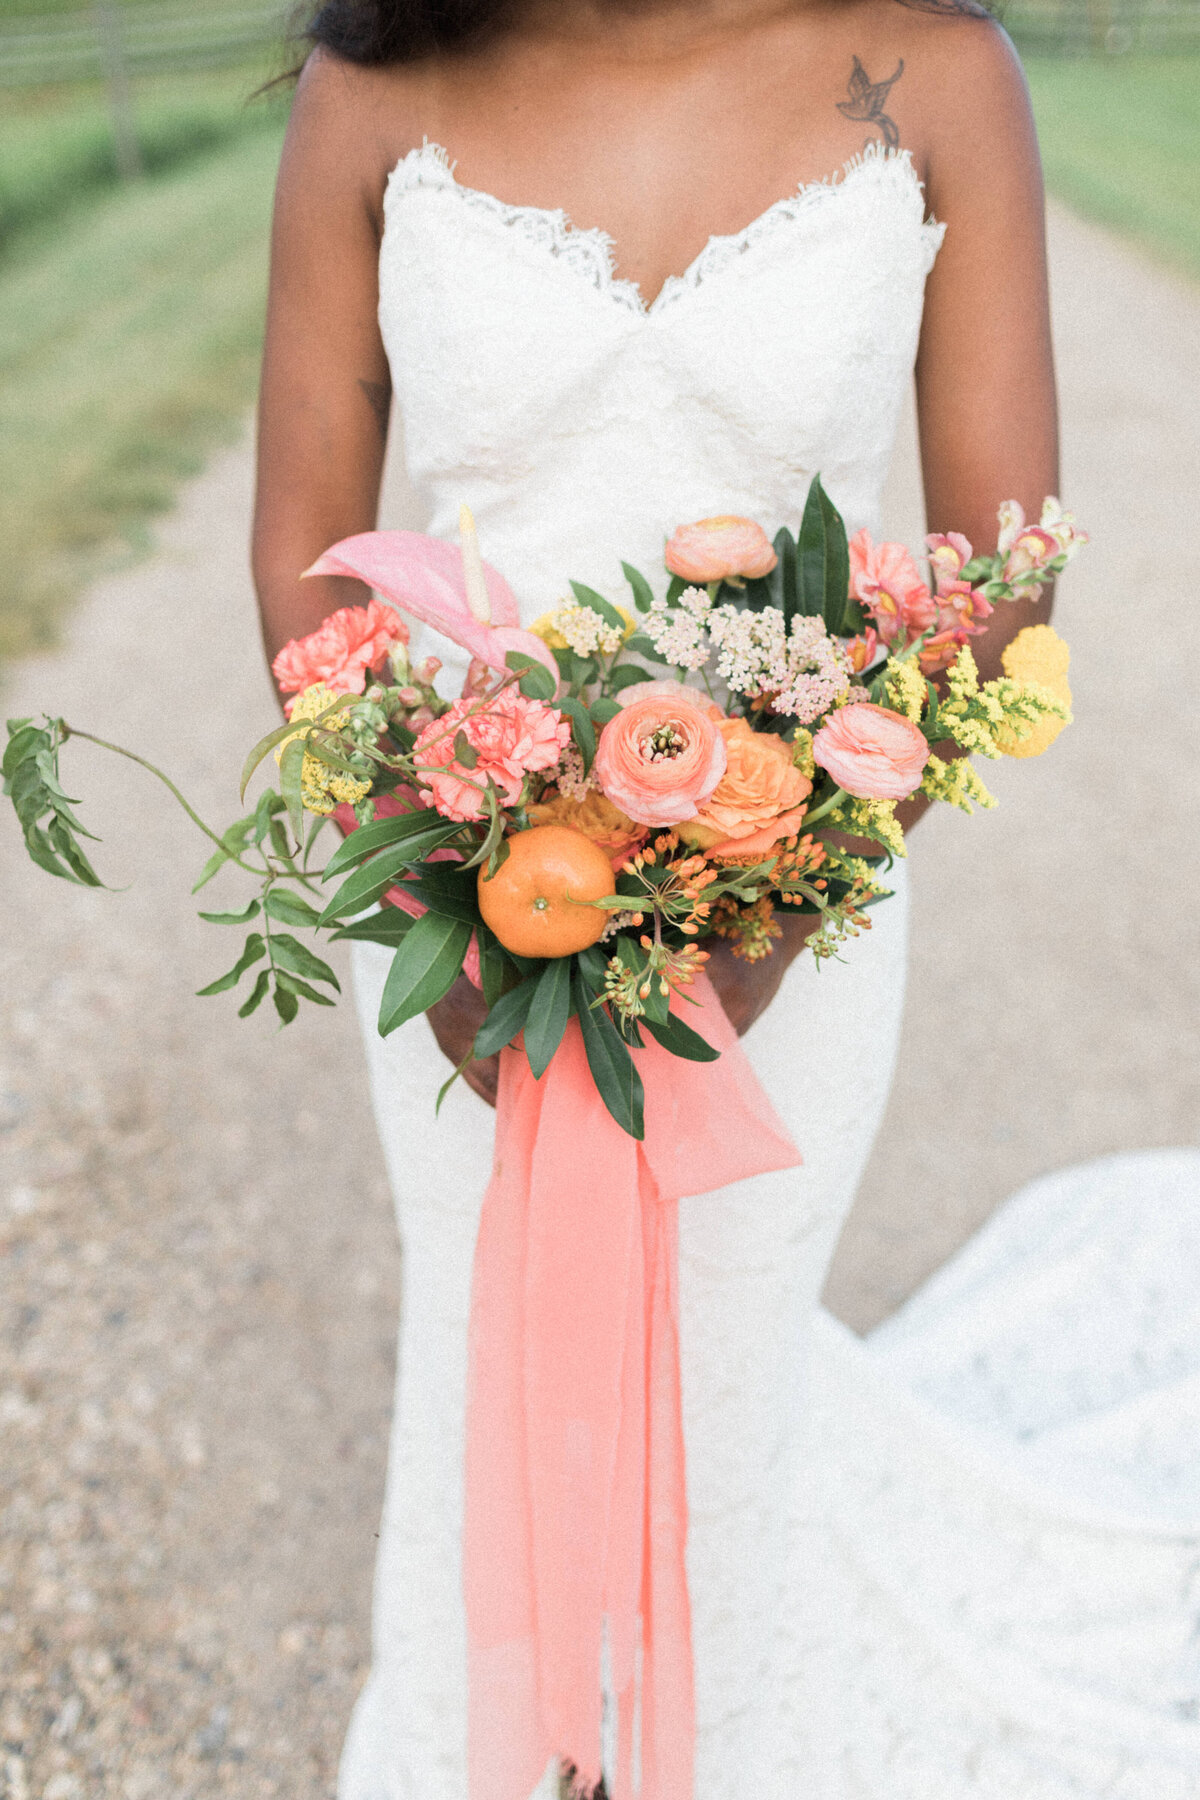 Bright and colourful bouquet with pink, yellow and tangerine by Meadow & Vine Floral, romantic Alberta wedding florist, featured on the Brontë Bride Vendor Guide.